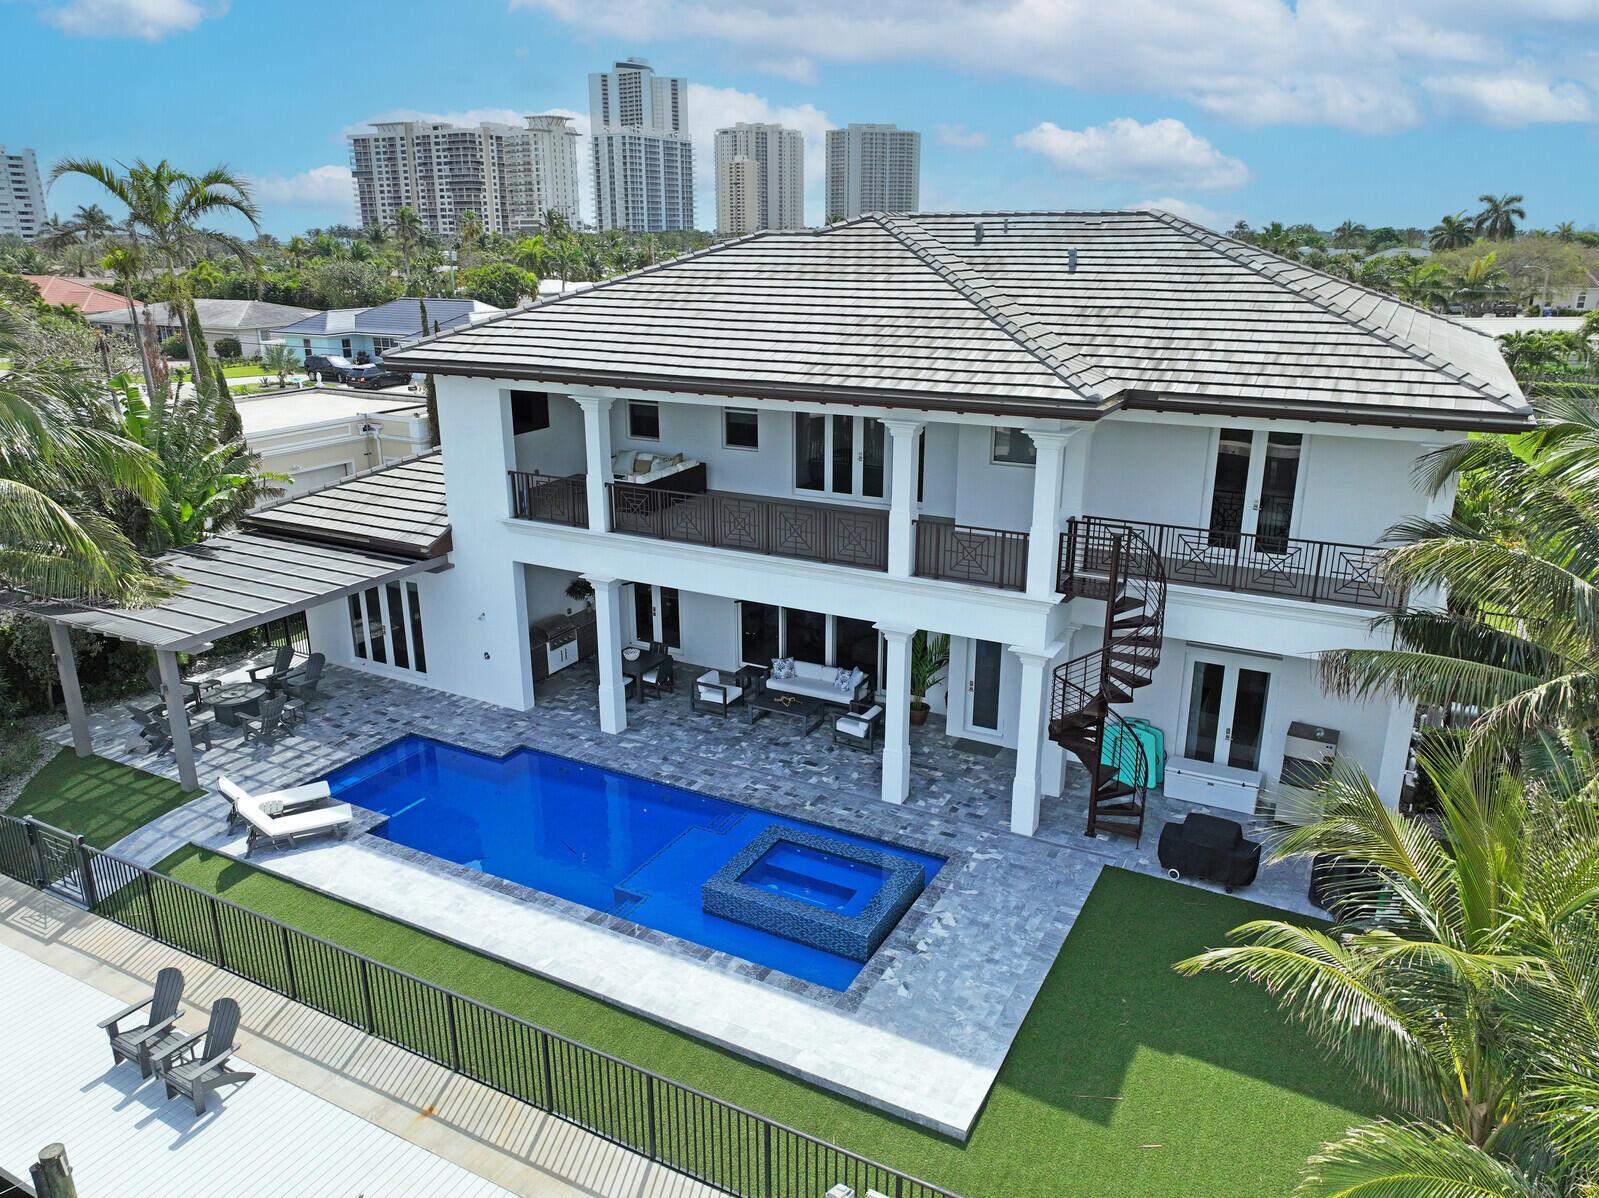 Built in 2019, this upgraded home sits on an expansive 11,000 sq ft intracoastal waterfront lot, fulfilling every boater's or water enthusiast's fantasy with 100' of waterfrontage, perfect for up to an 80' yacht thanks to the deep water and wide channel. Nestled on Bimini Lane, homes here offer deeded beach access. Step through grand oversized entry doors into a realm of opulence across an open floor plan. Gaze through rear sliding glass doors to behold your dream water vista beyond the pool and vanishing edge spa. This home boasts over 4,200 sq ft of AC living space and over 6,000 sq ft of total area, featuring 5 large BR'S and 5.5 BA'S. The first floor encompasses a master suite, formal dining area, laundry room, powder bath, and a private cabana suite with a large covered lanai. Ascend to the second floor via stairs or private elevator to find a secondary master suite, wet bar area, two guest suites, a media loft, covered lanai, and washer/dryer unit. Craftsmanship shines with high-end plumbing and electrical fixtures, a Sub-zero appliance package including an oversized refrigerator and natural gas cooktop in the kitchen. Revel in outdoor gatherings with the outdoor kitchen and natural gas grill. Full house generator! Experience award-winning craftsmanship and transform this residence into your personal sanctuary. Singer Island beckons as paradise awaits your arrival.